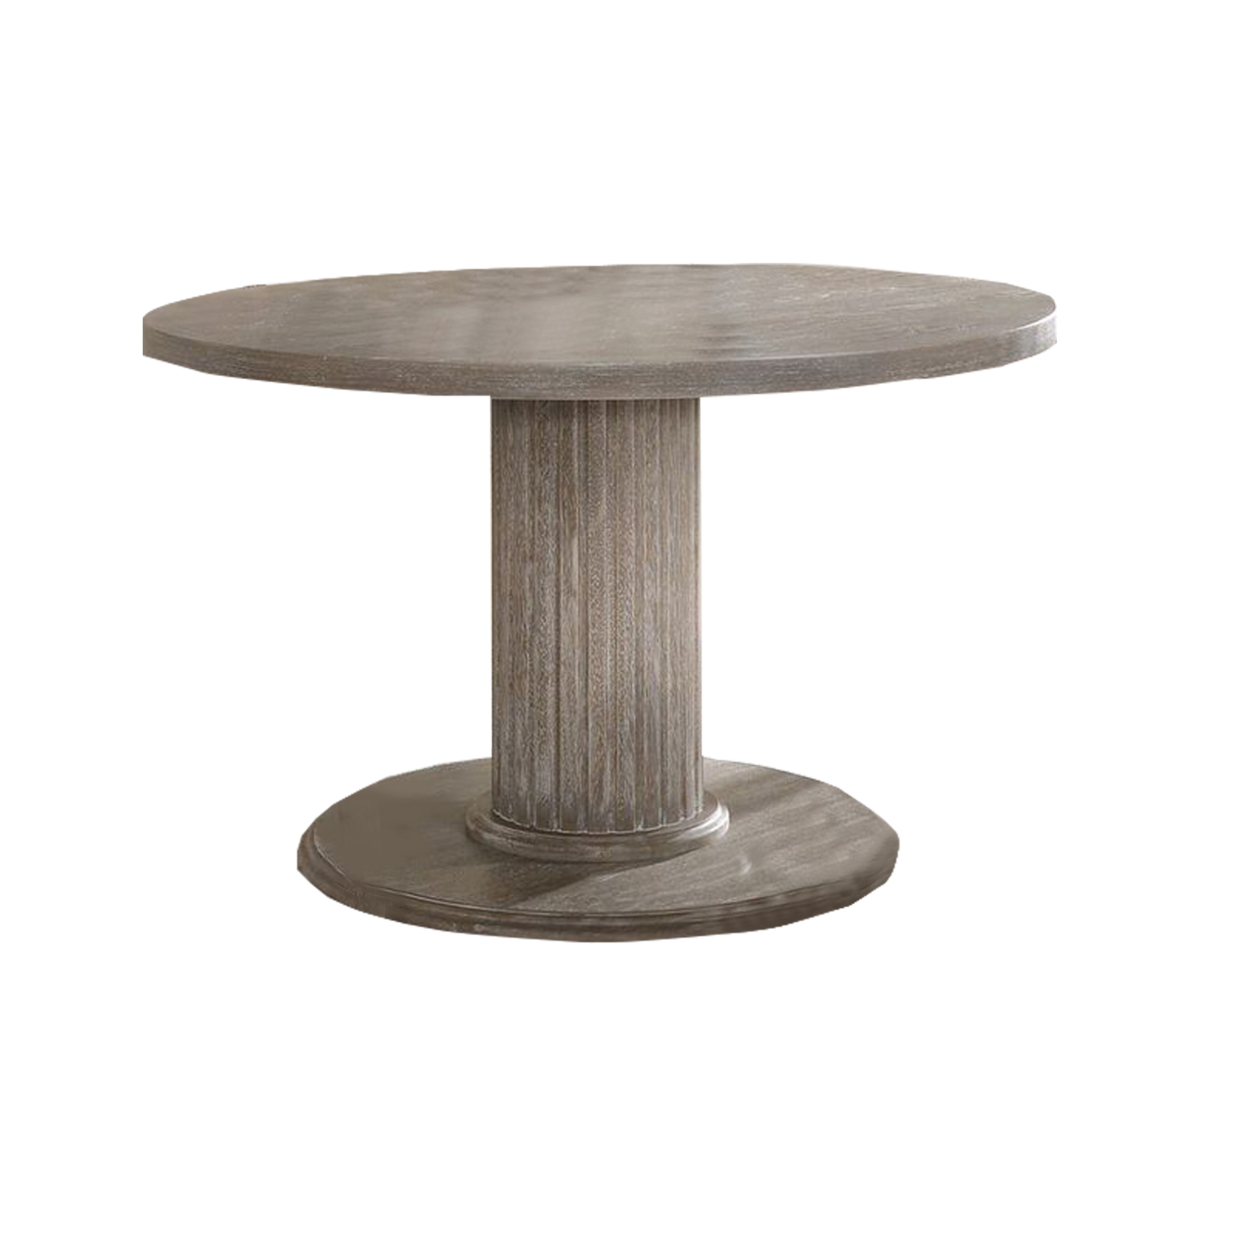 Round Dining Table With Fluted Column Pedestal Base, Gray- Saltoro Sherpi